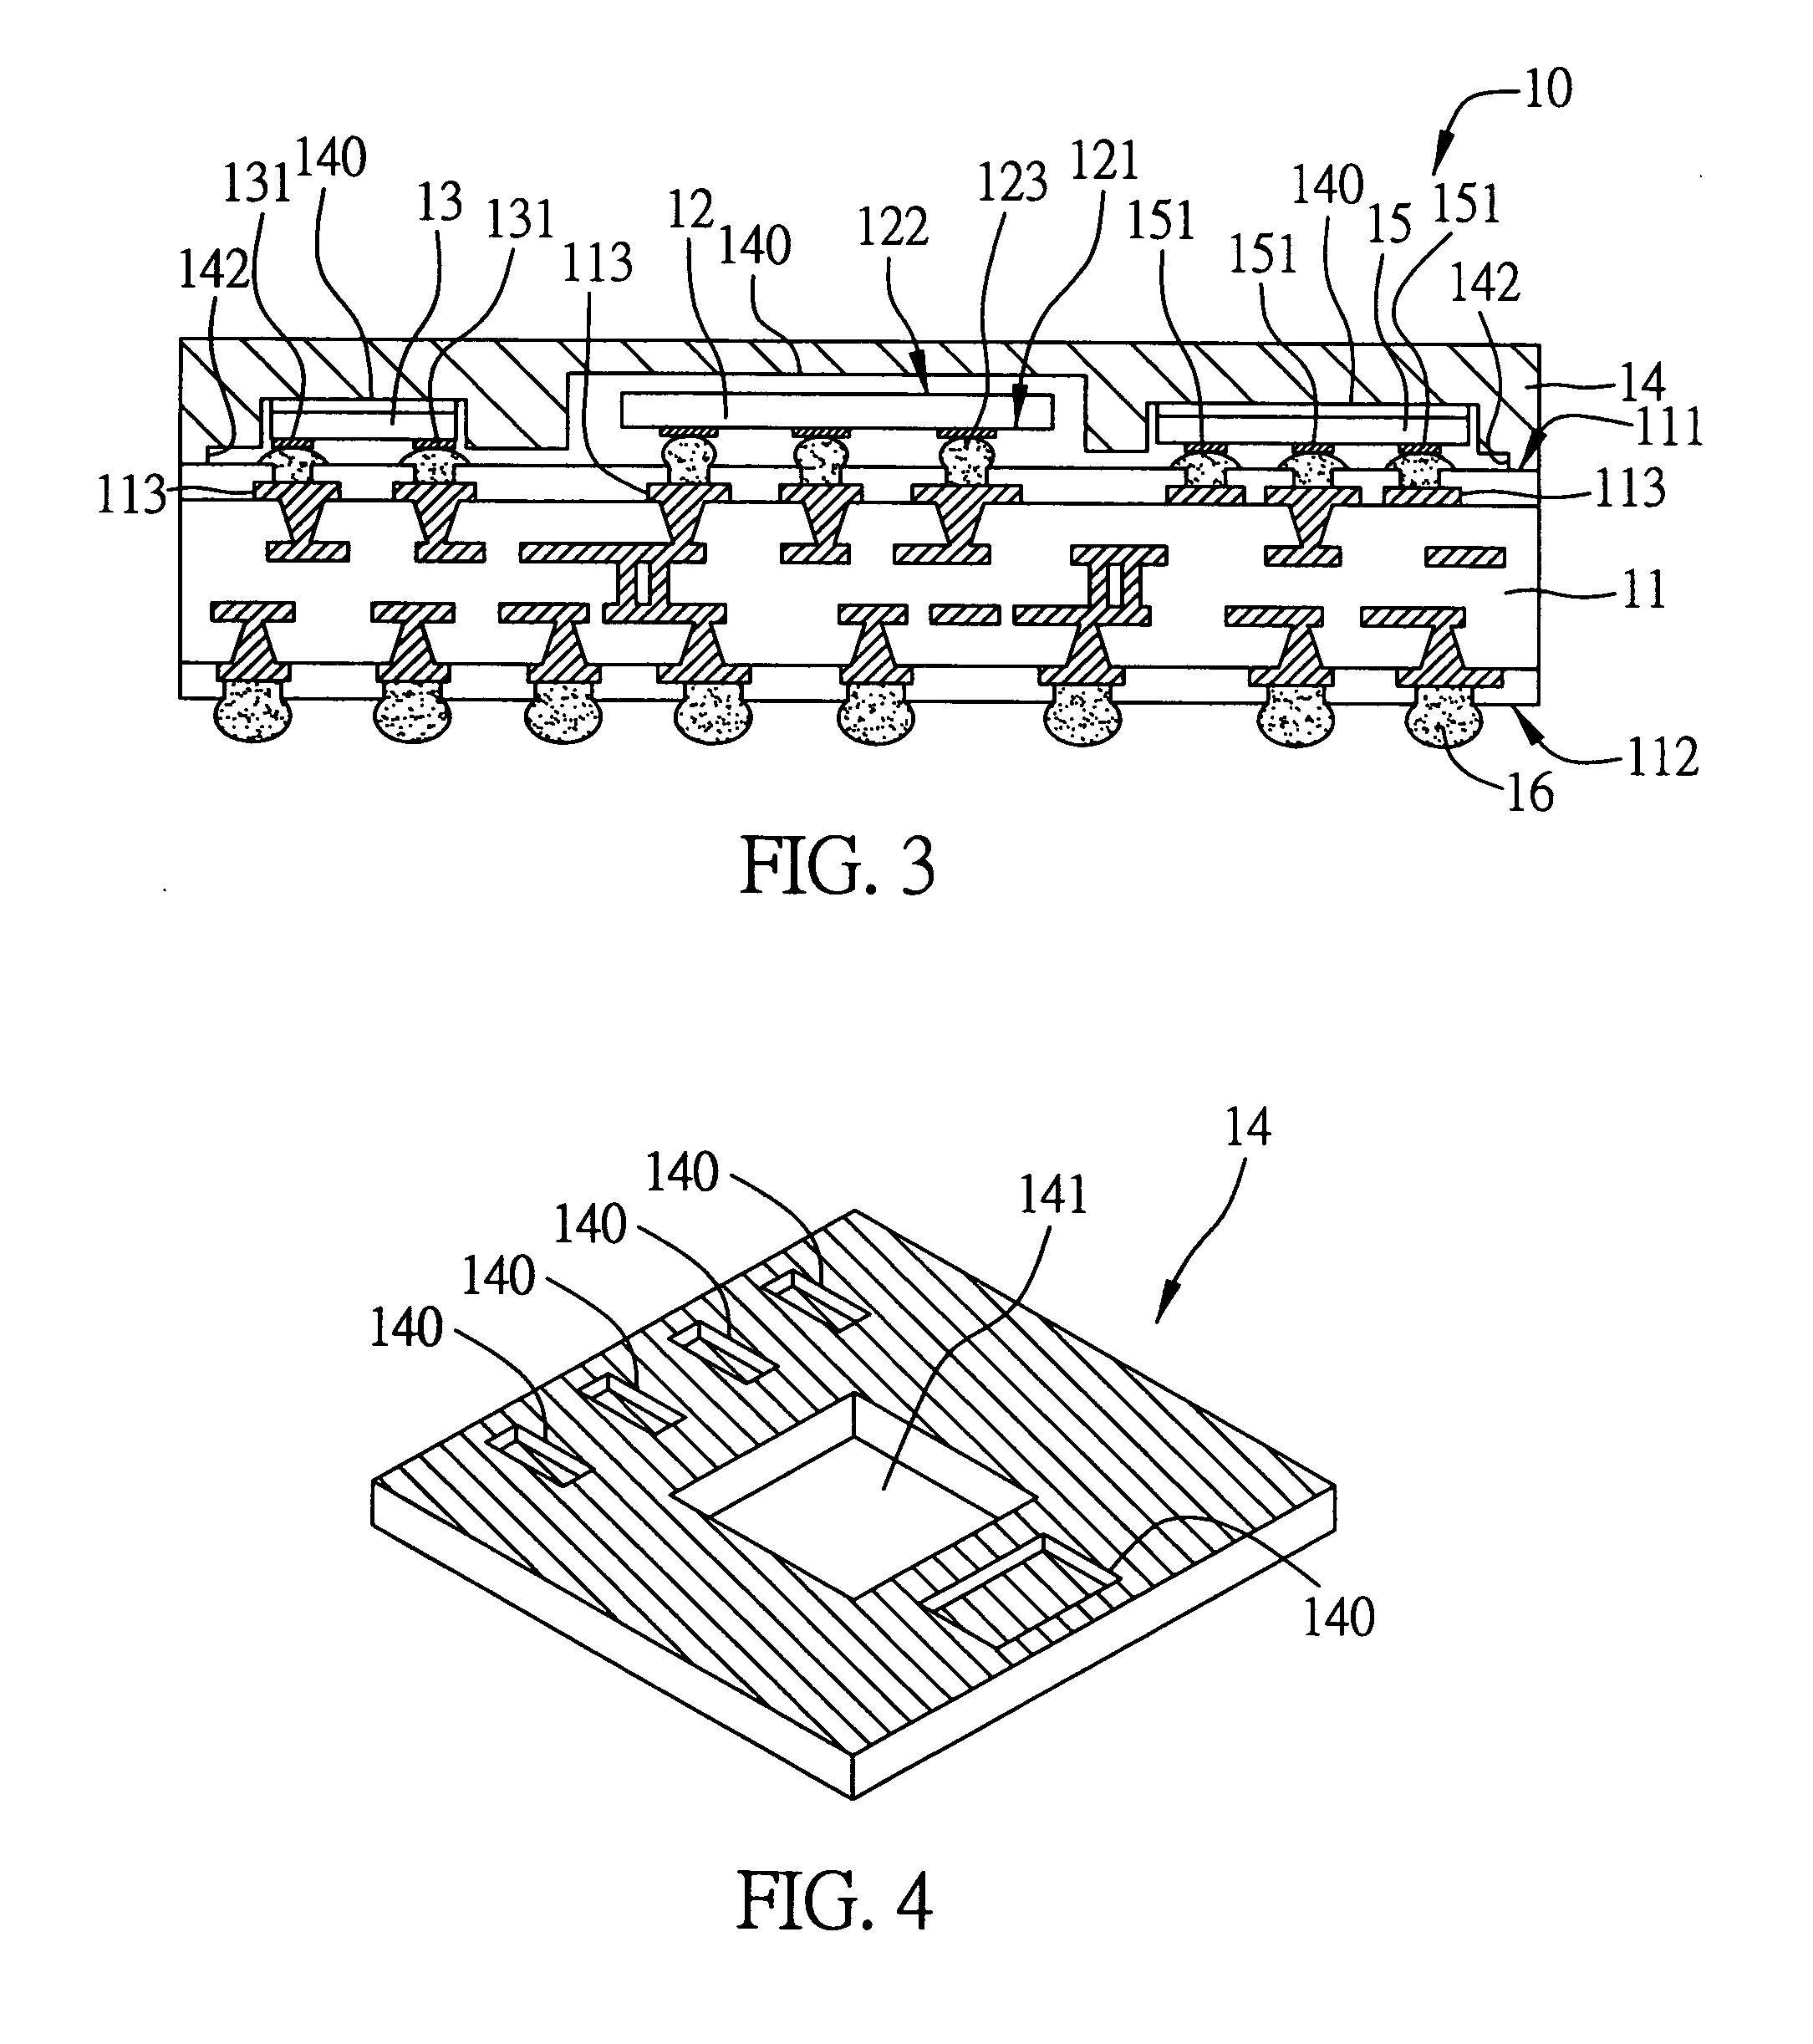 Heat sink structure with embedded electronic components for semiconductor package